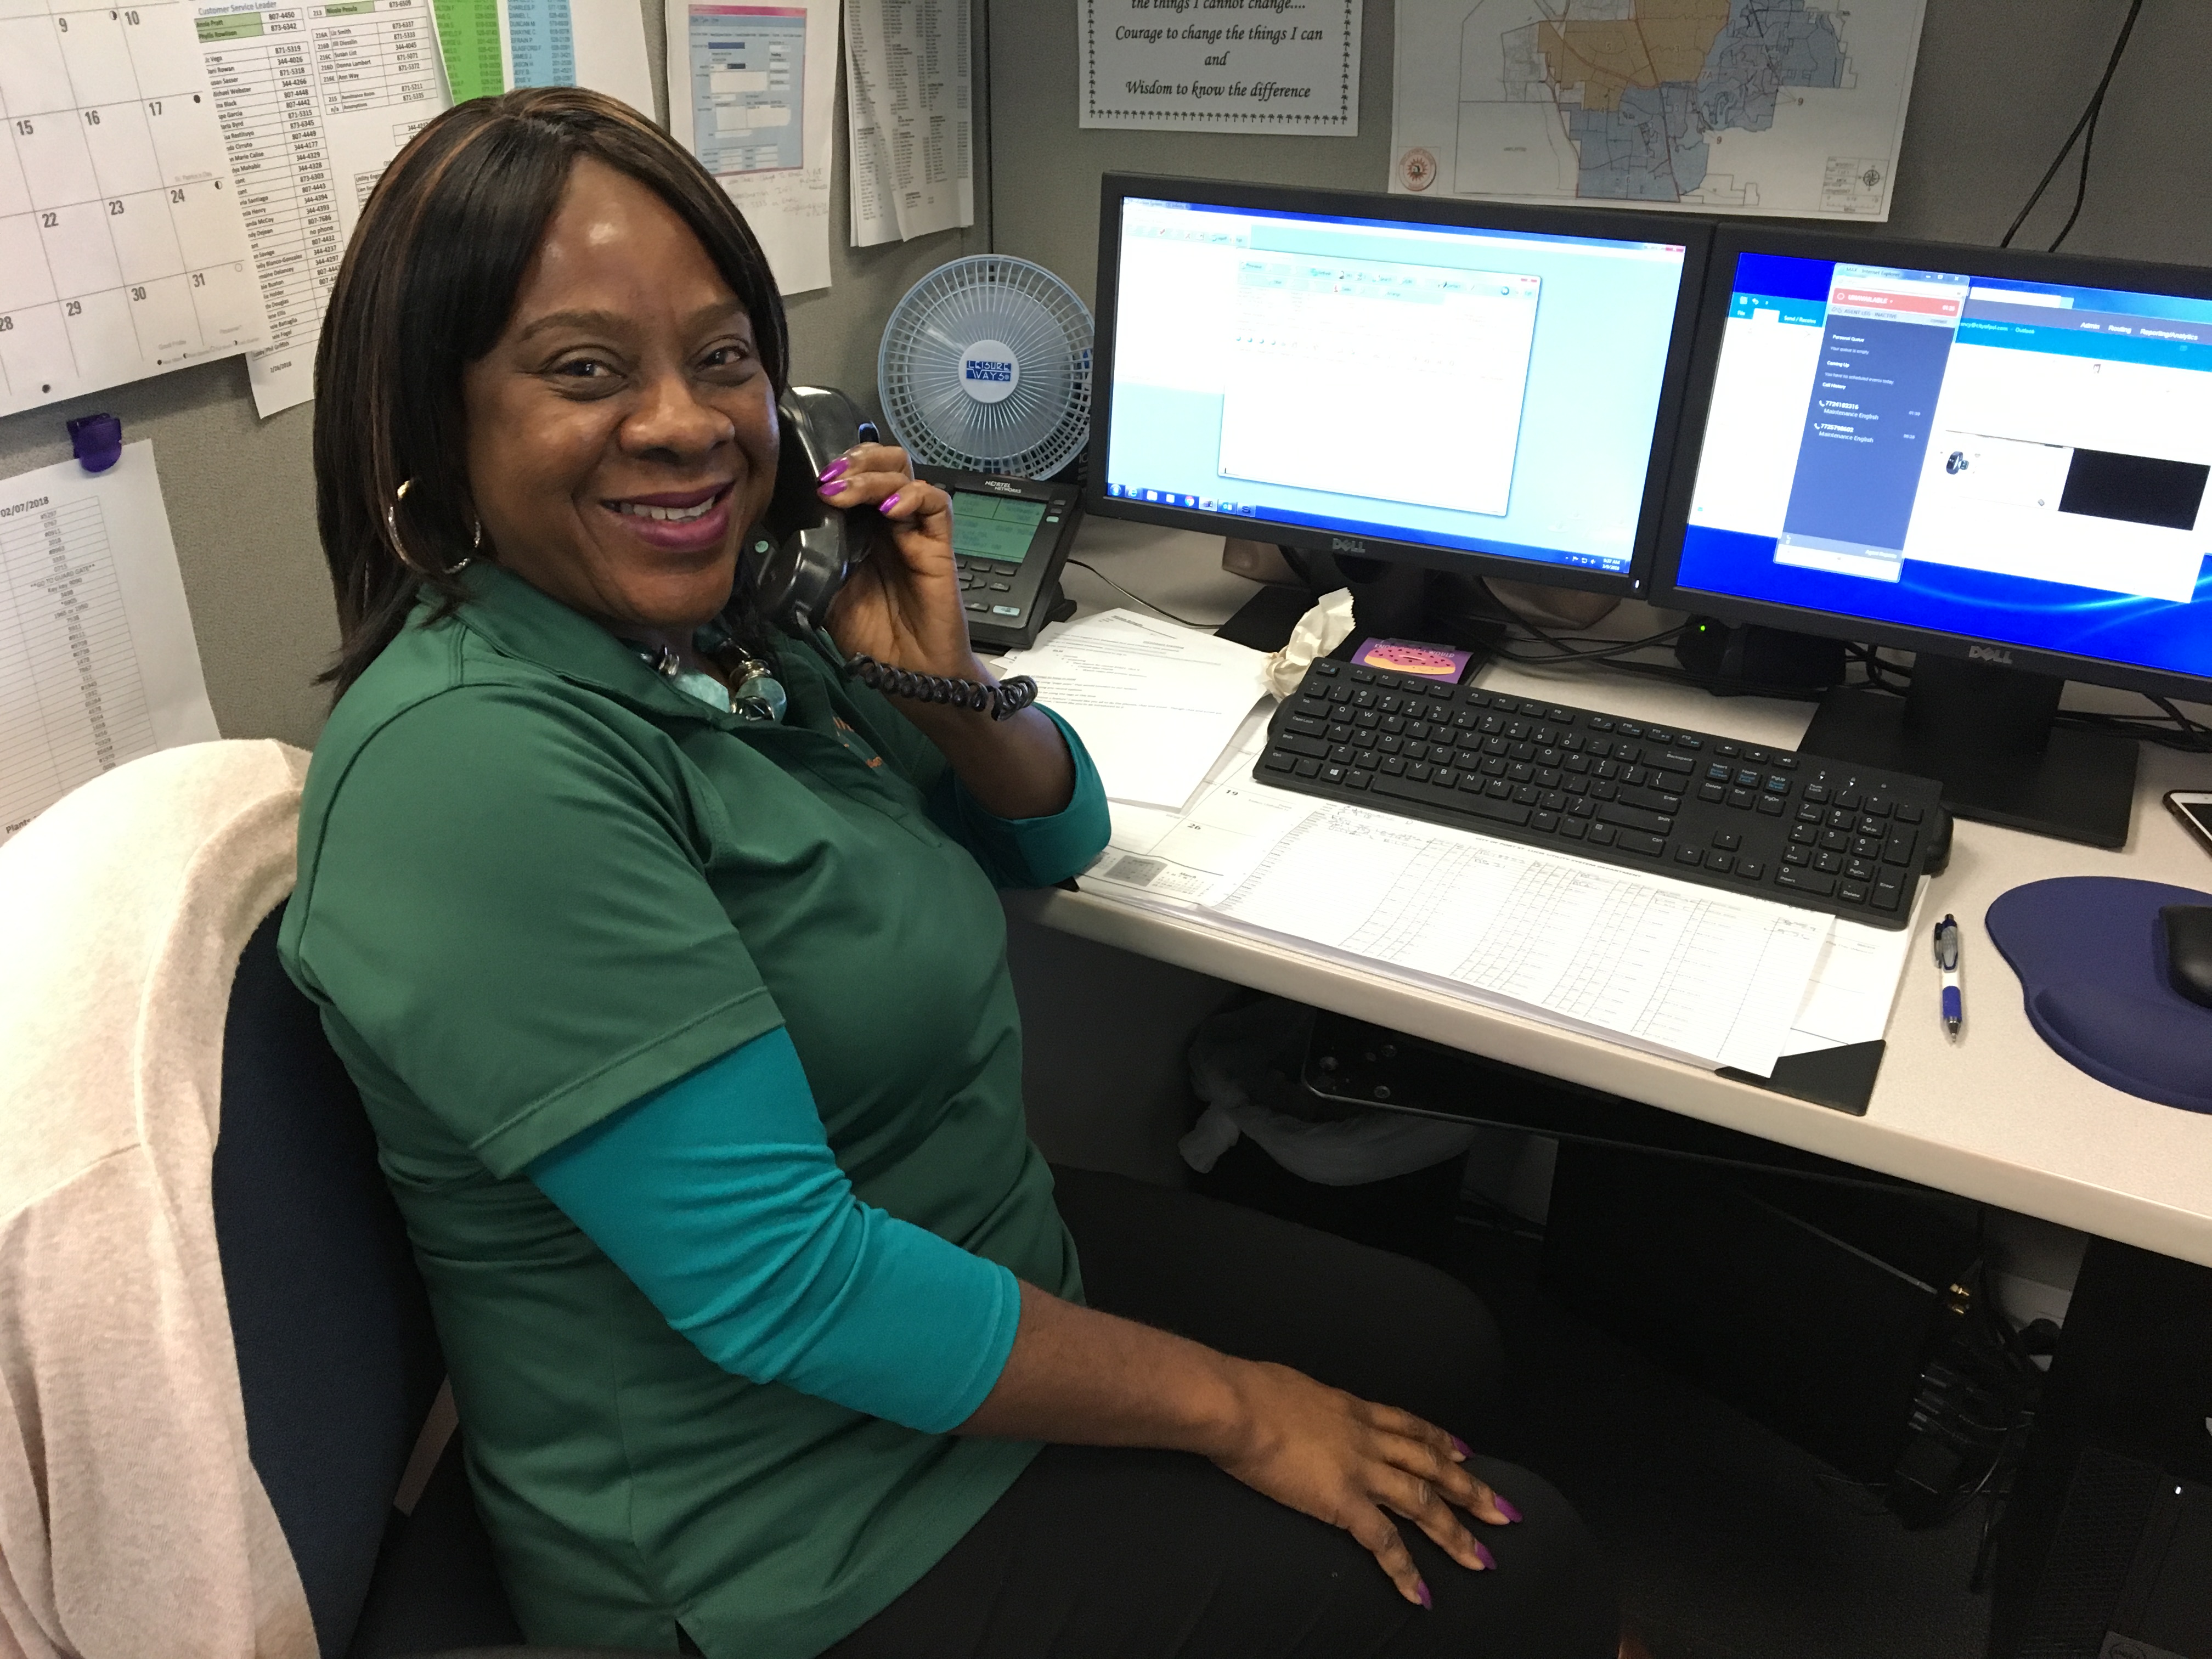 Customer Service Specialist smiling while speaking to a customer on the phone